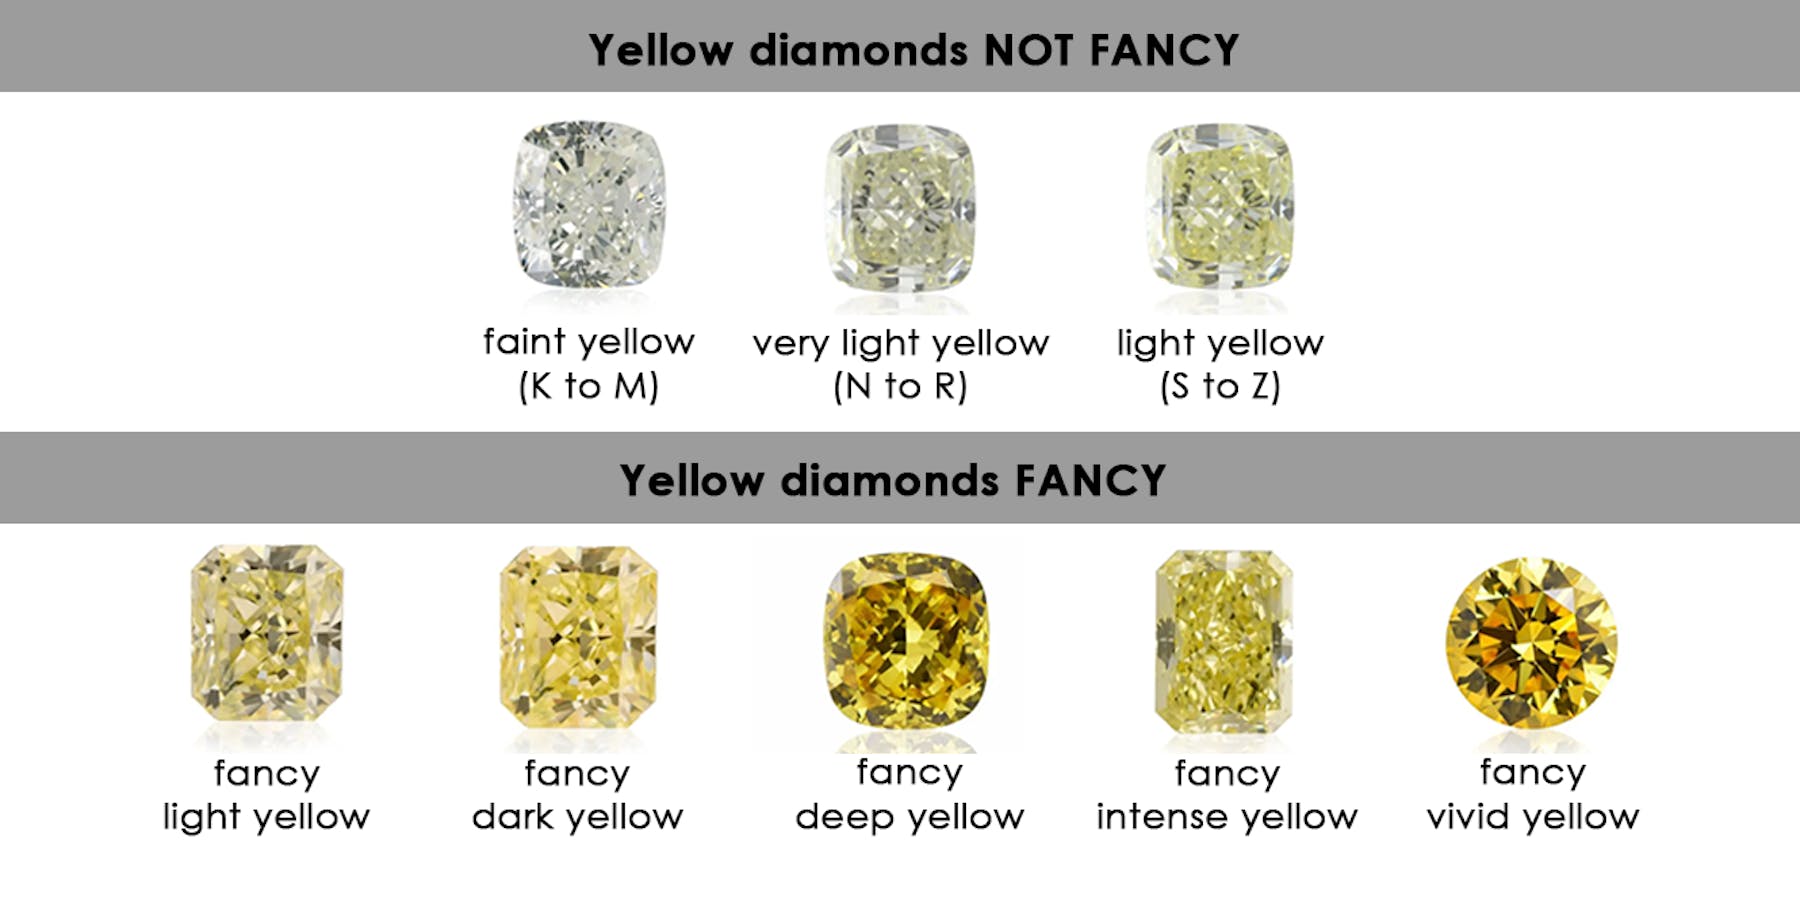 My Diamond Ring Diamond Guide Image how to find the right engagement ring diamond 4c Color yellow diamonds fancy vs not fancy